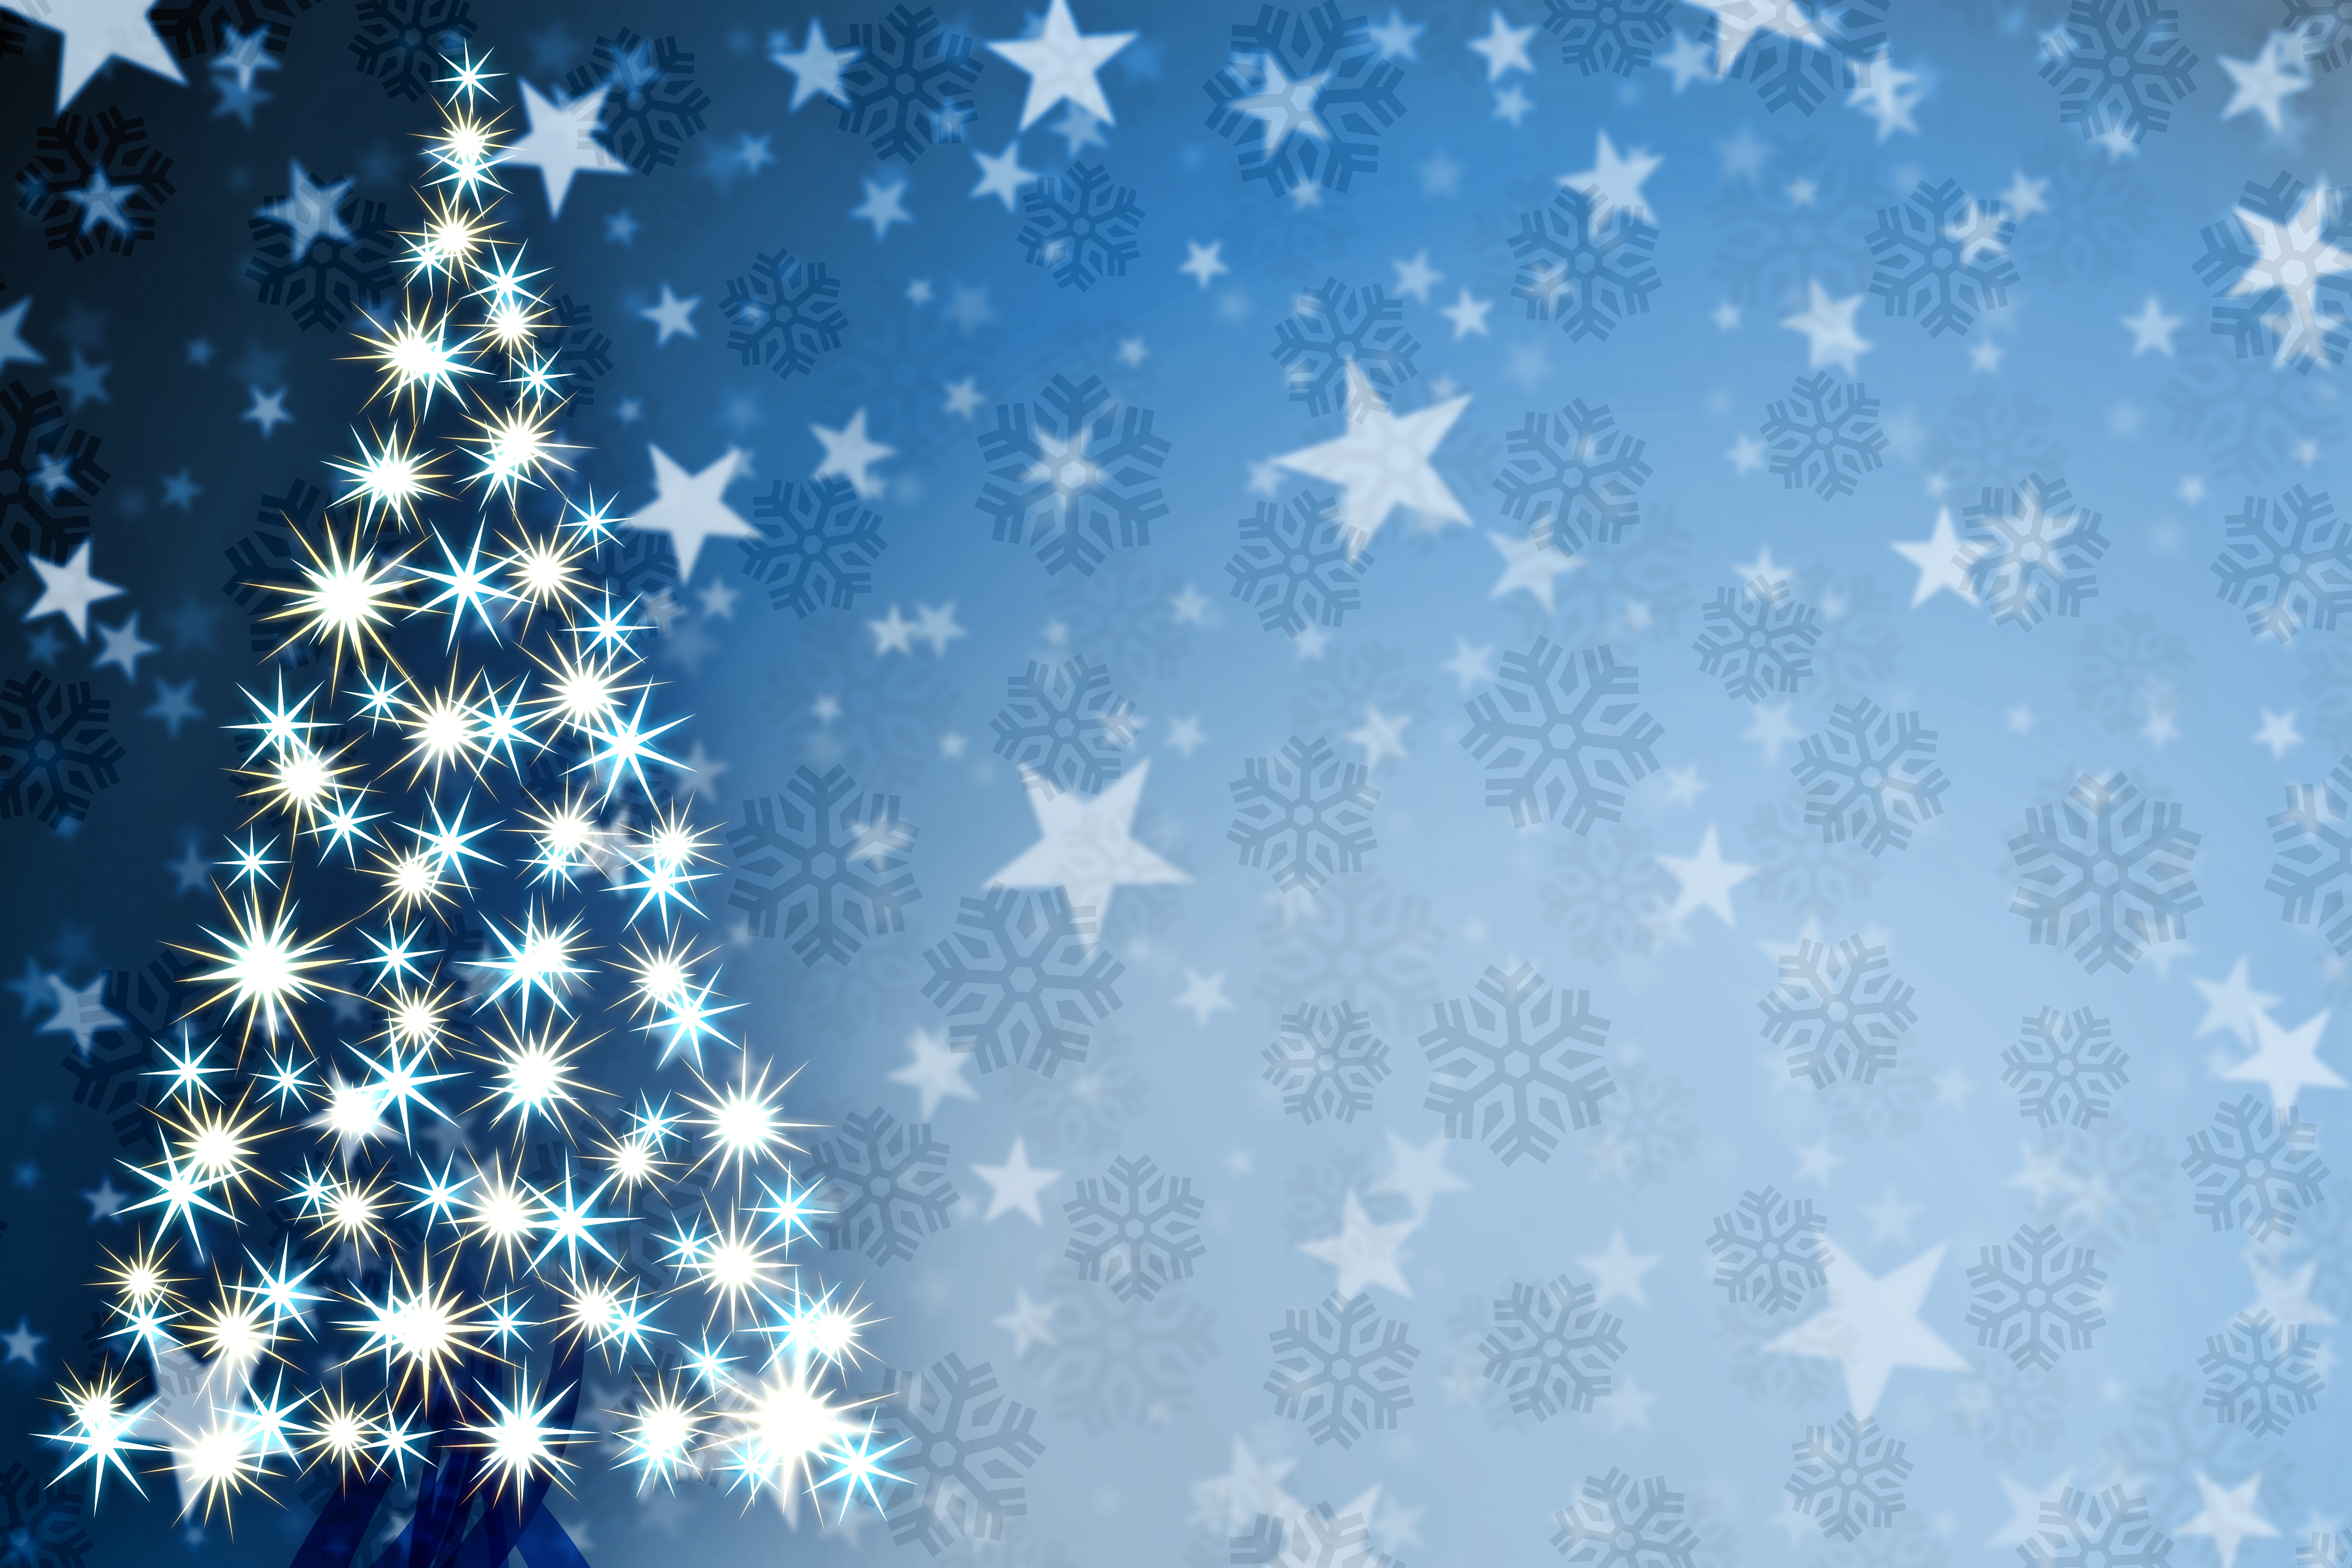 Wallpapers stars holidays decorated christmas tree on the desktop